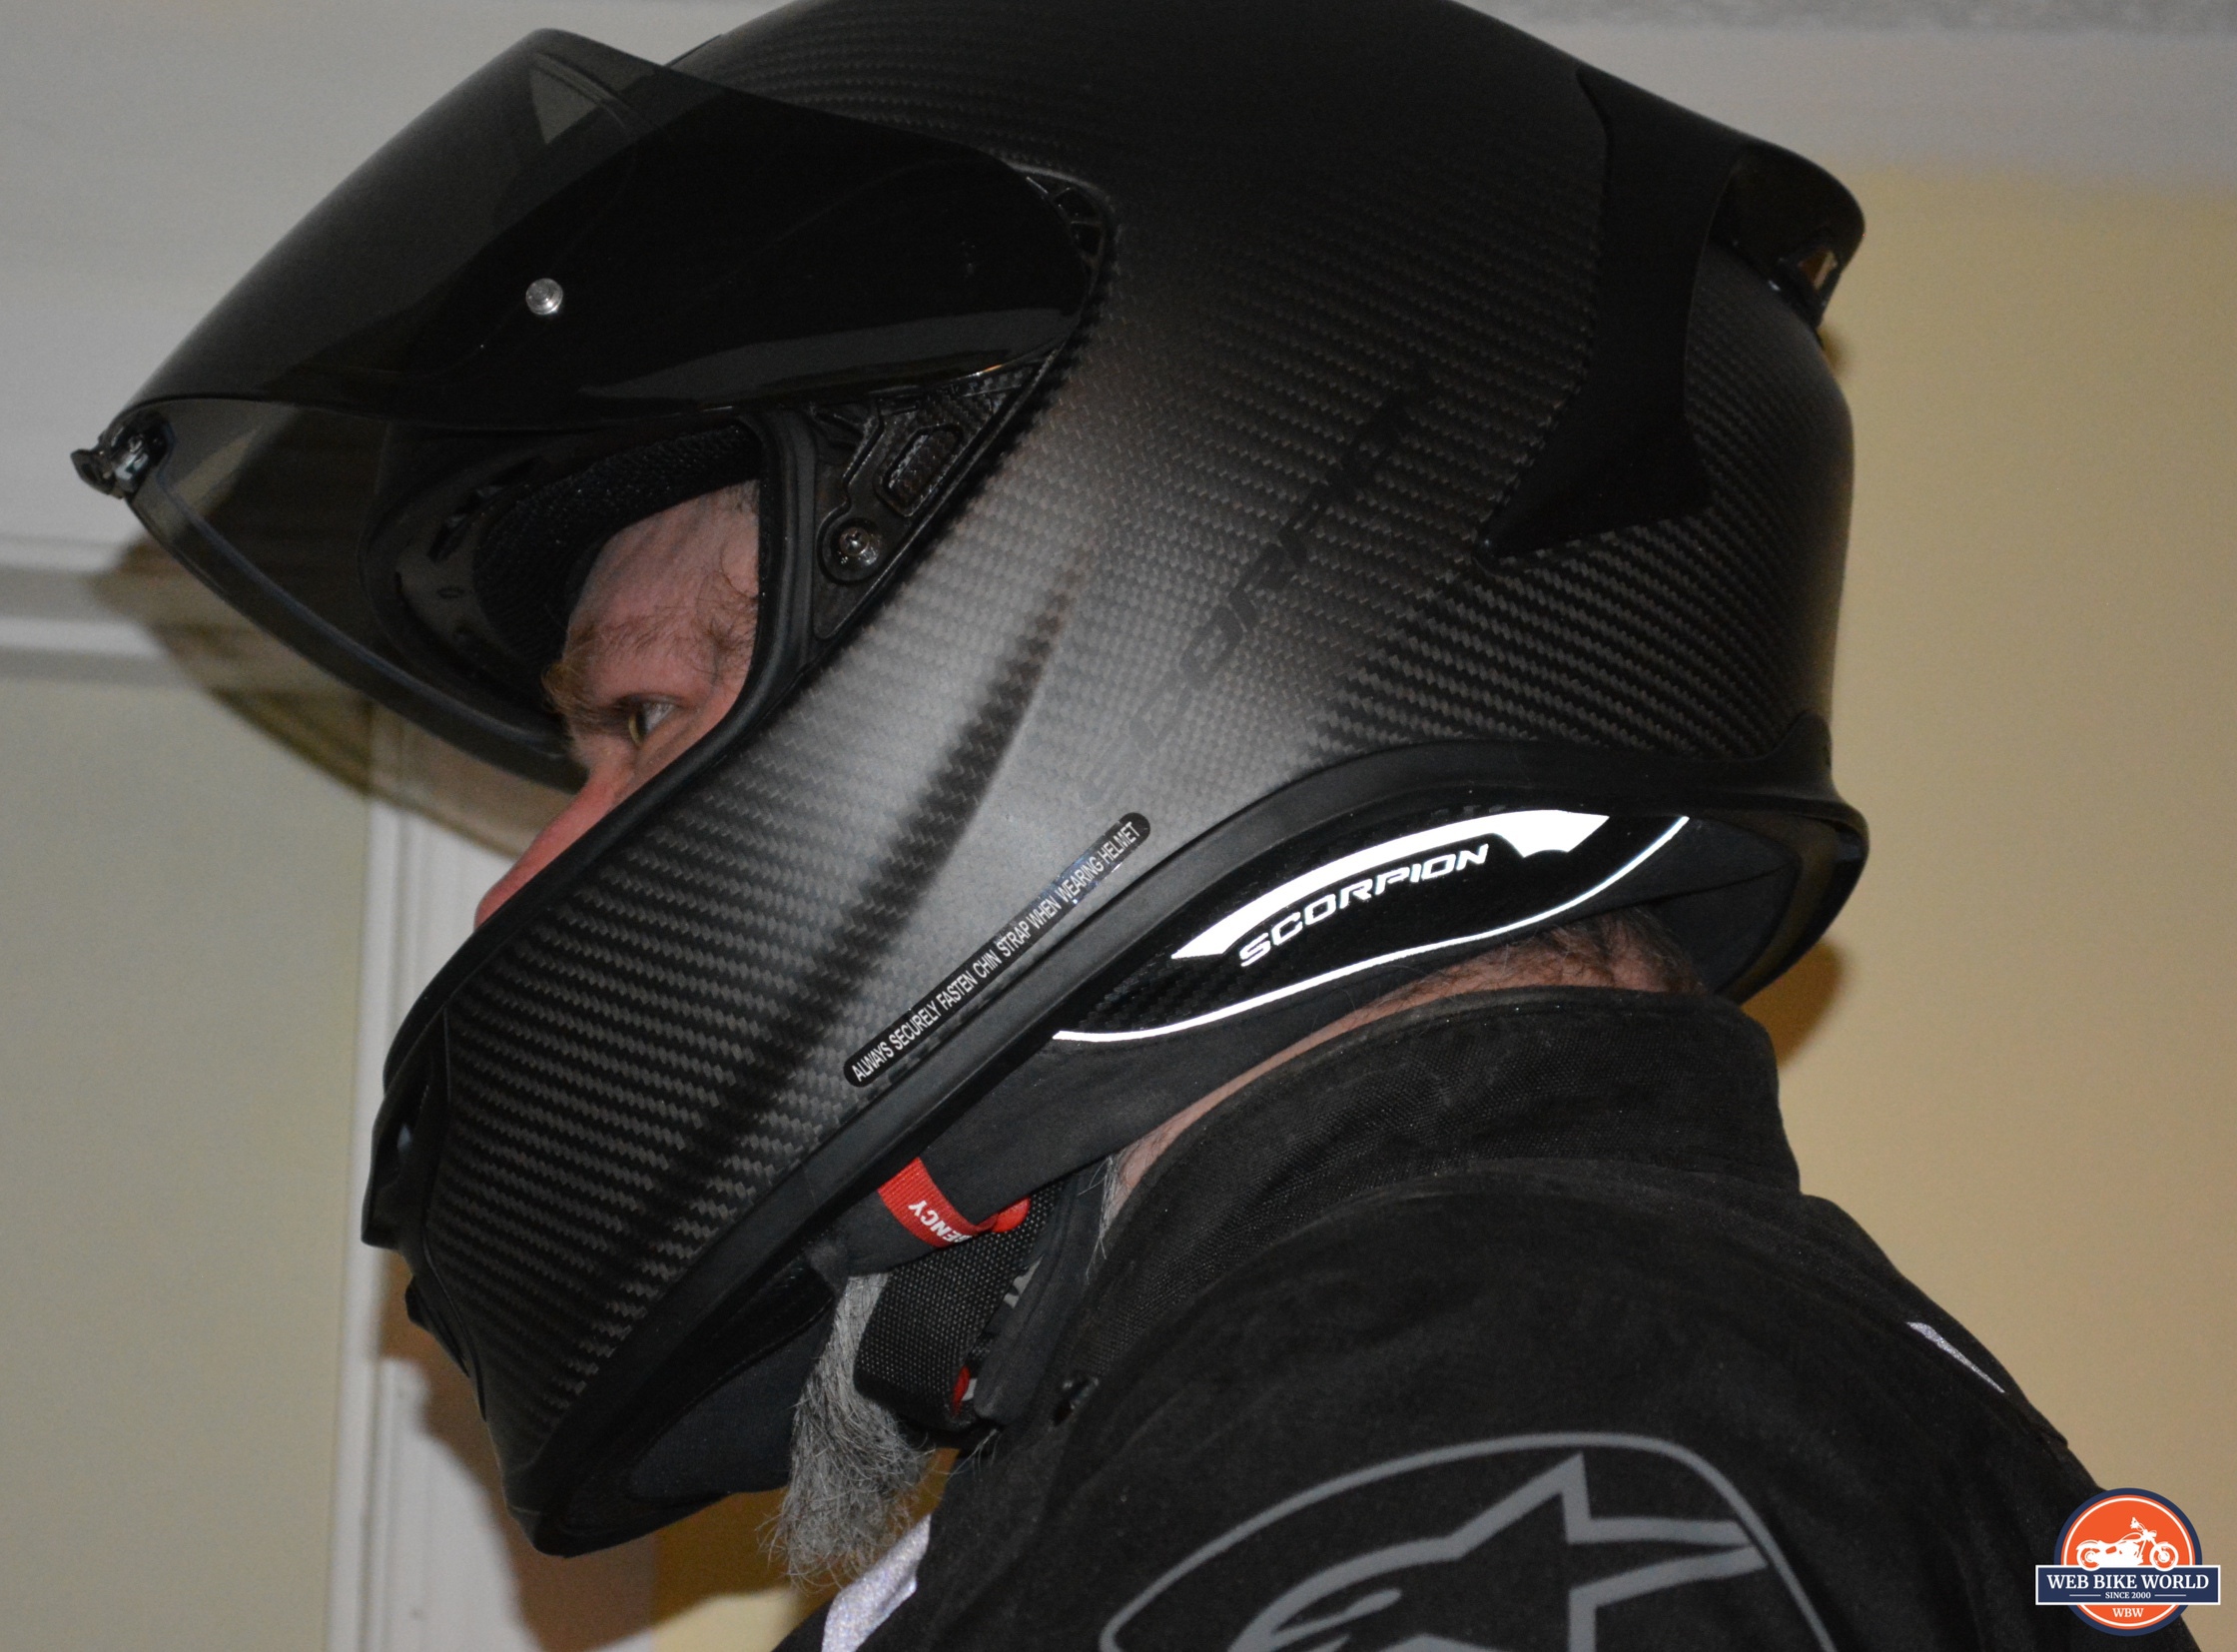 Side view of reviewer wearing the Scorpion EXO-R1 Air Carbon Helmet